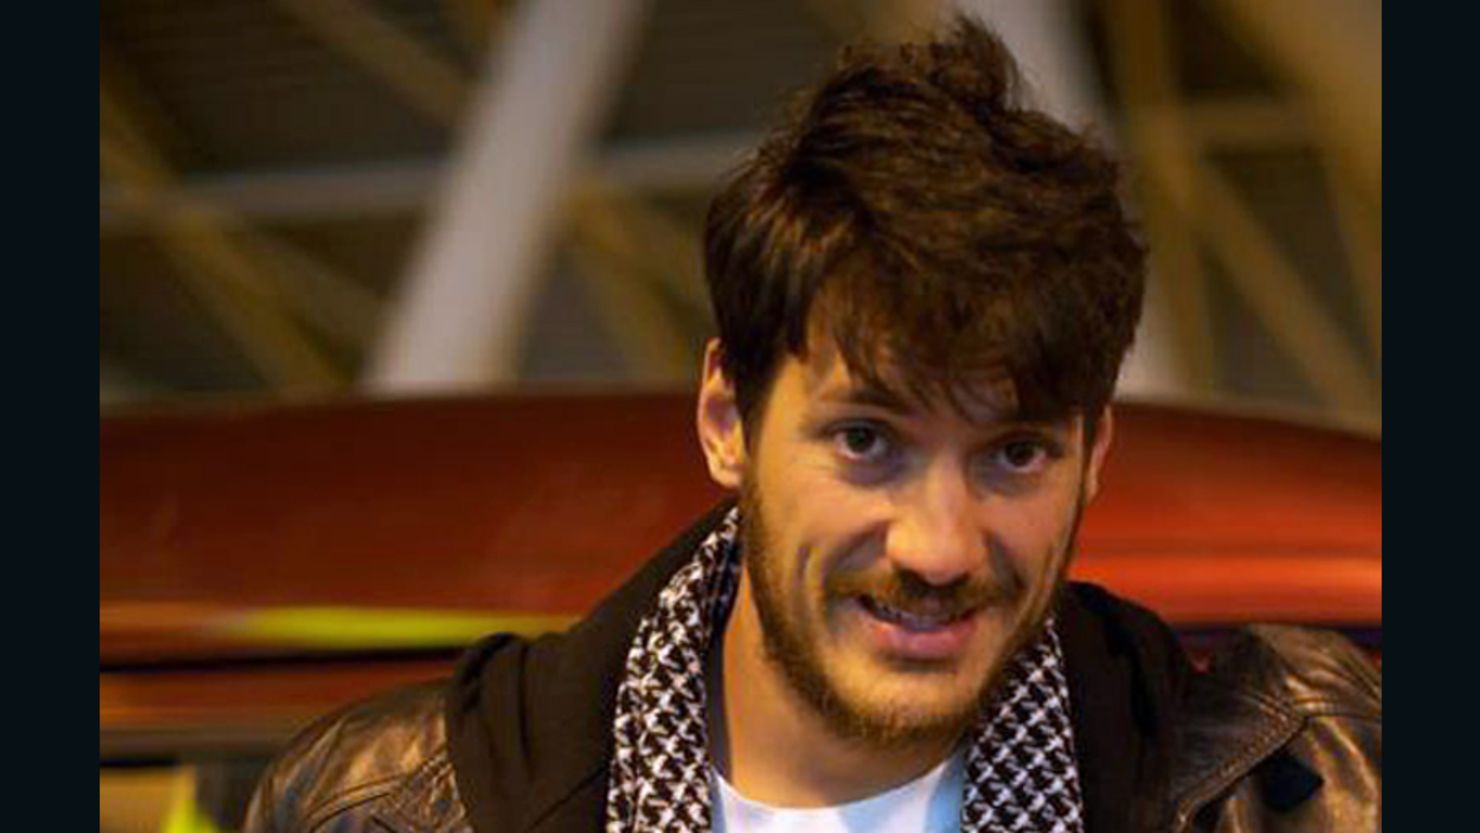 Austin Tice, a freelance journalist working in Syria has not been heard from since August.